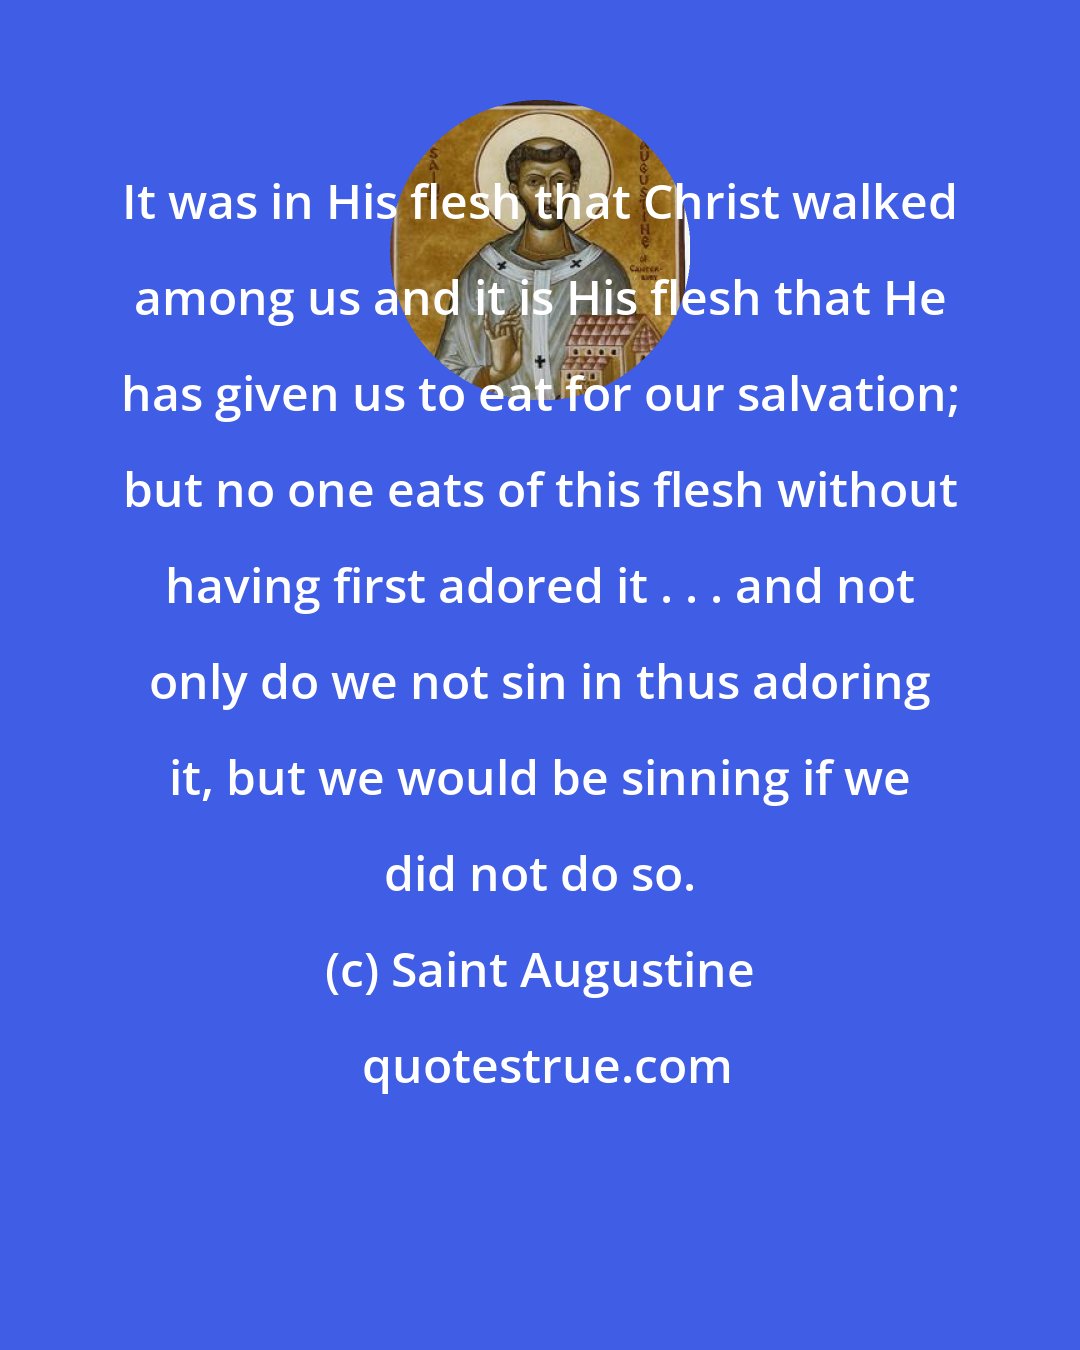 Saint Augustine: It was in His flesh that Christ walked among us and it is His flesh that He has given us to eat for our salvation; but no one eats of this flesh without having first adored it . . . and not only do we not sin in thus adoring it, but we would be sinning if we did not do so.